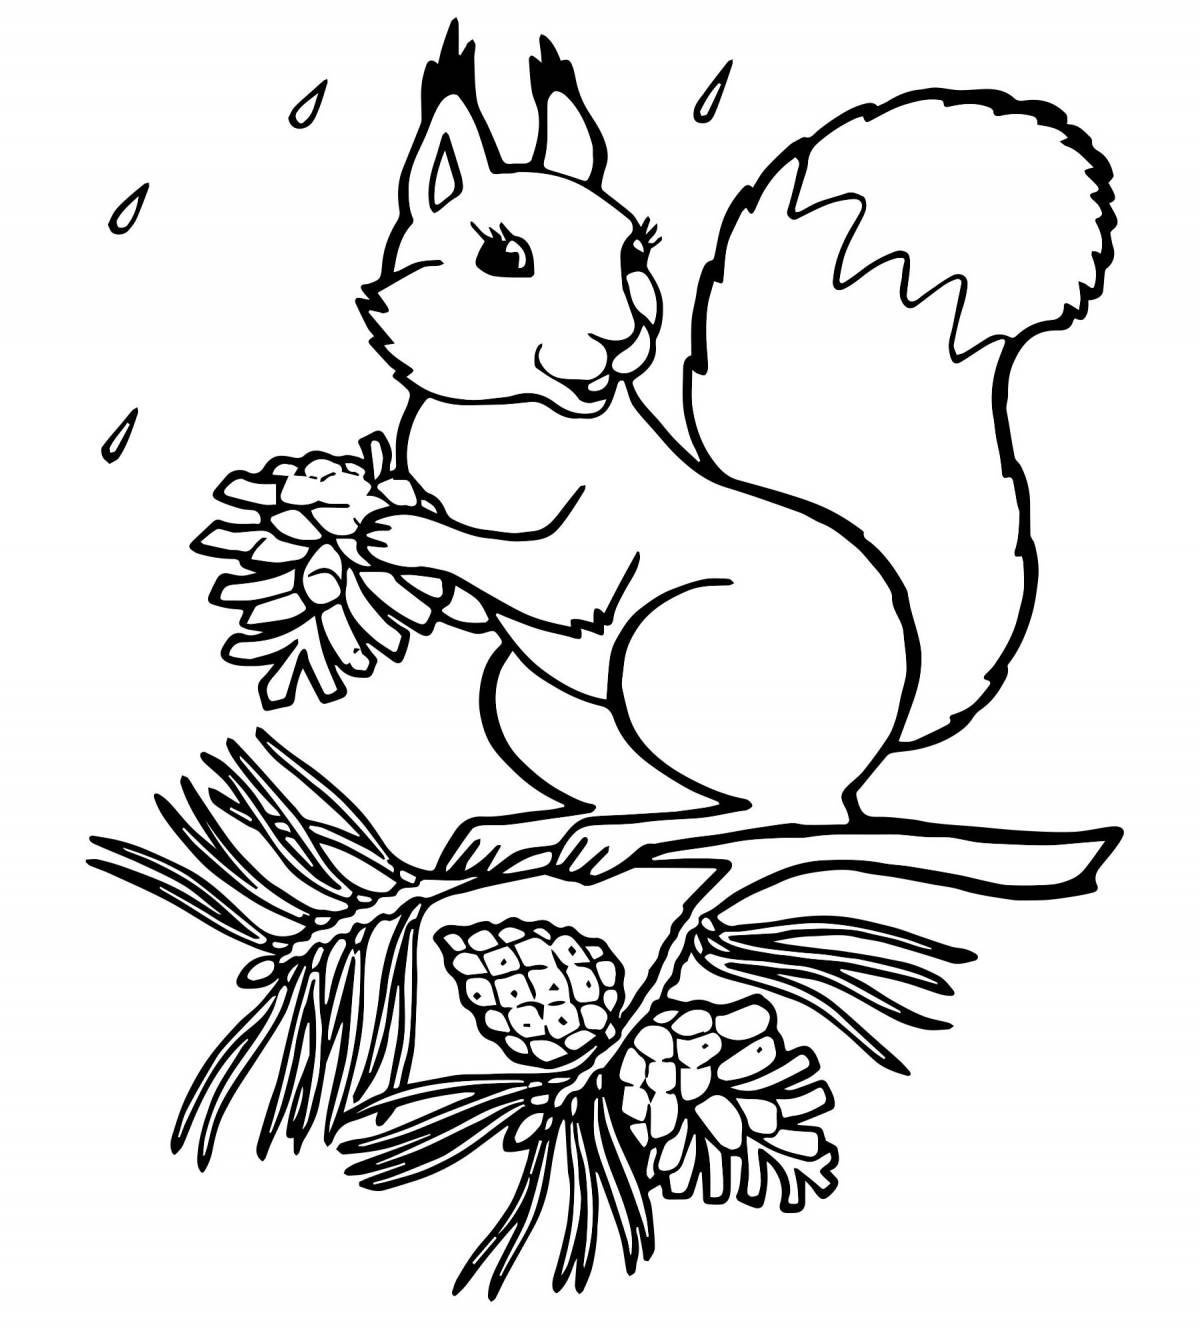 Squirrel live coloring for kids